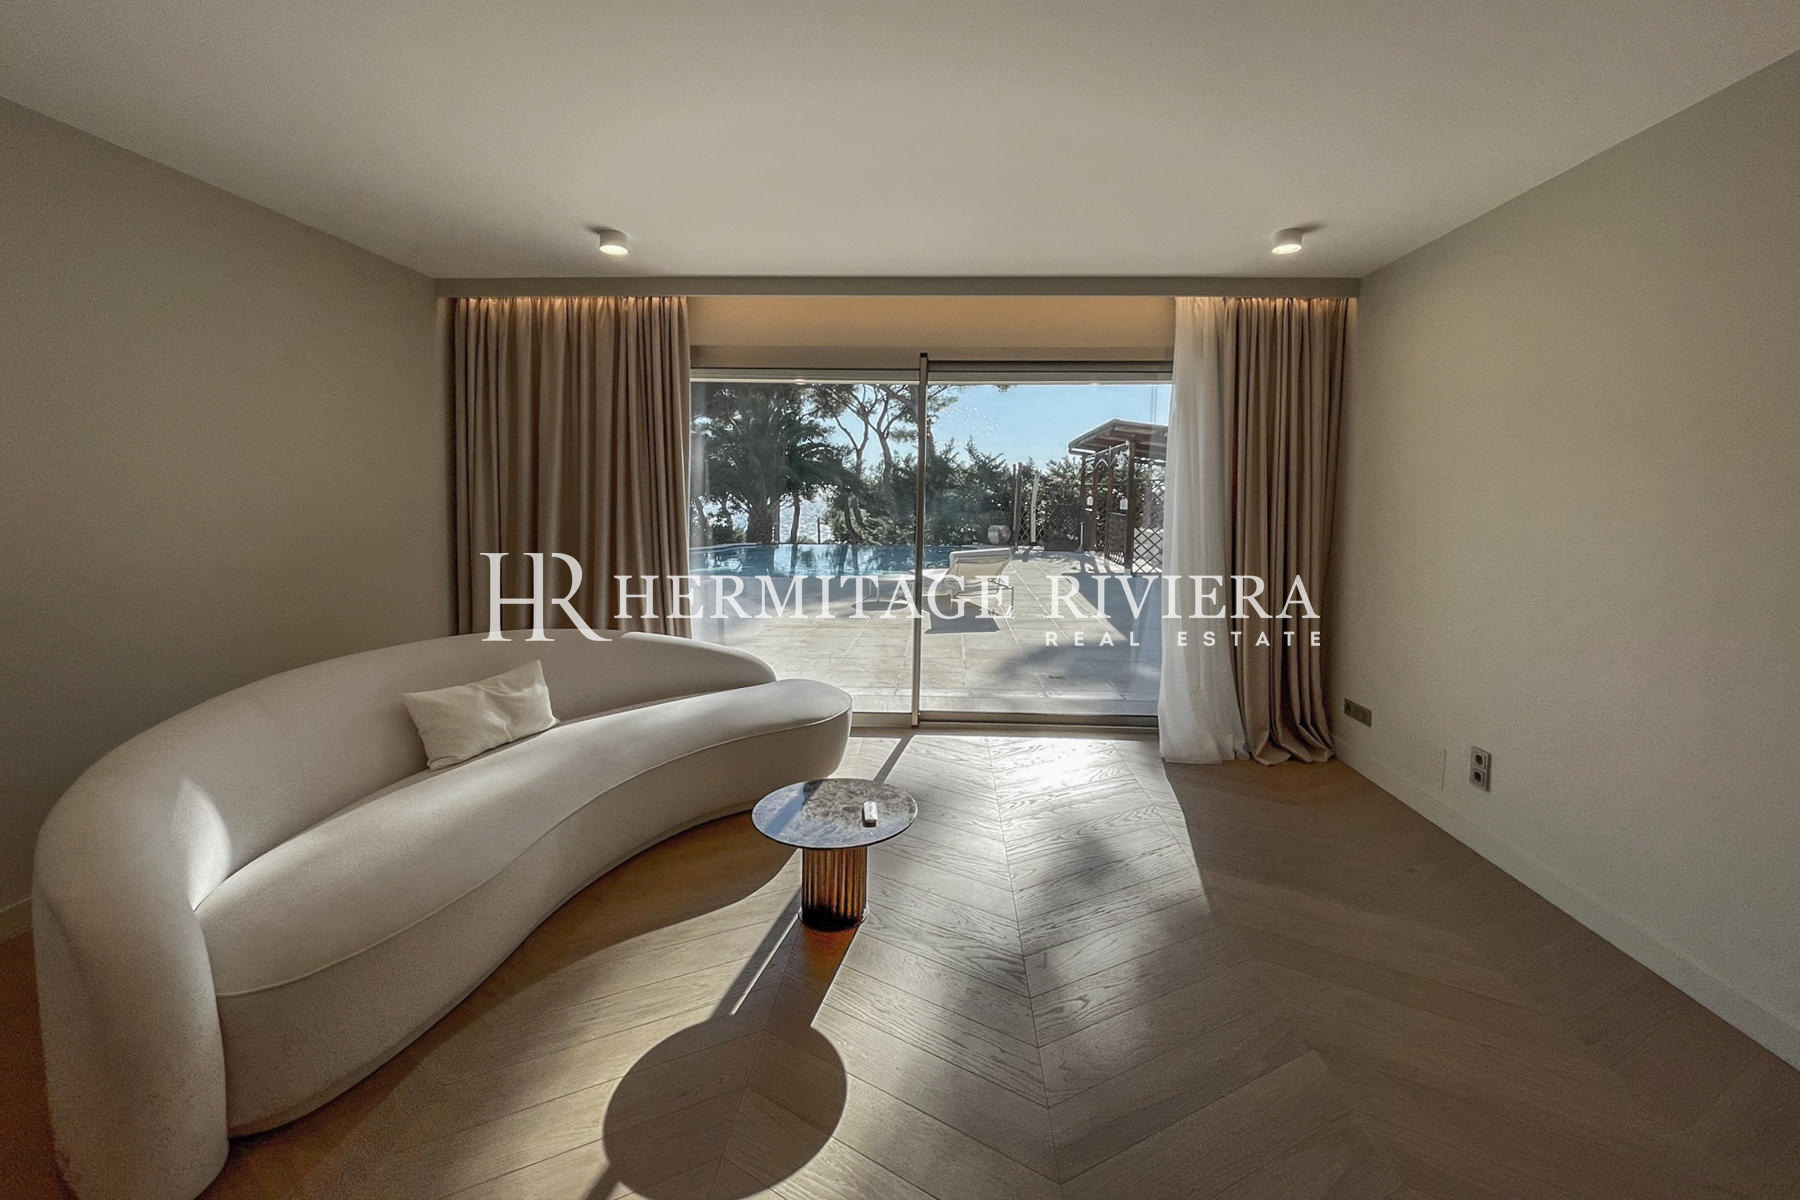 Property with views Monaco in sought after location (image 21)